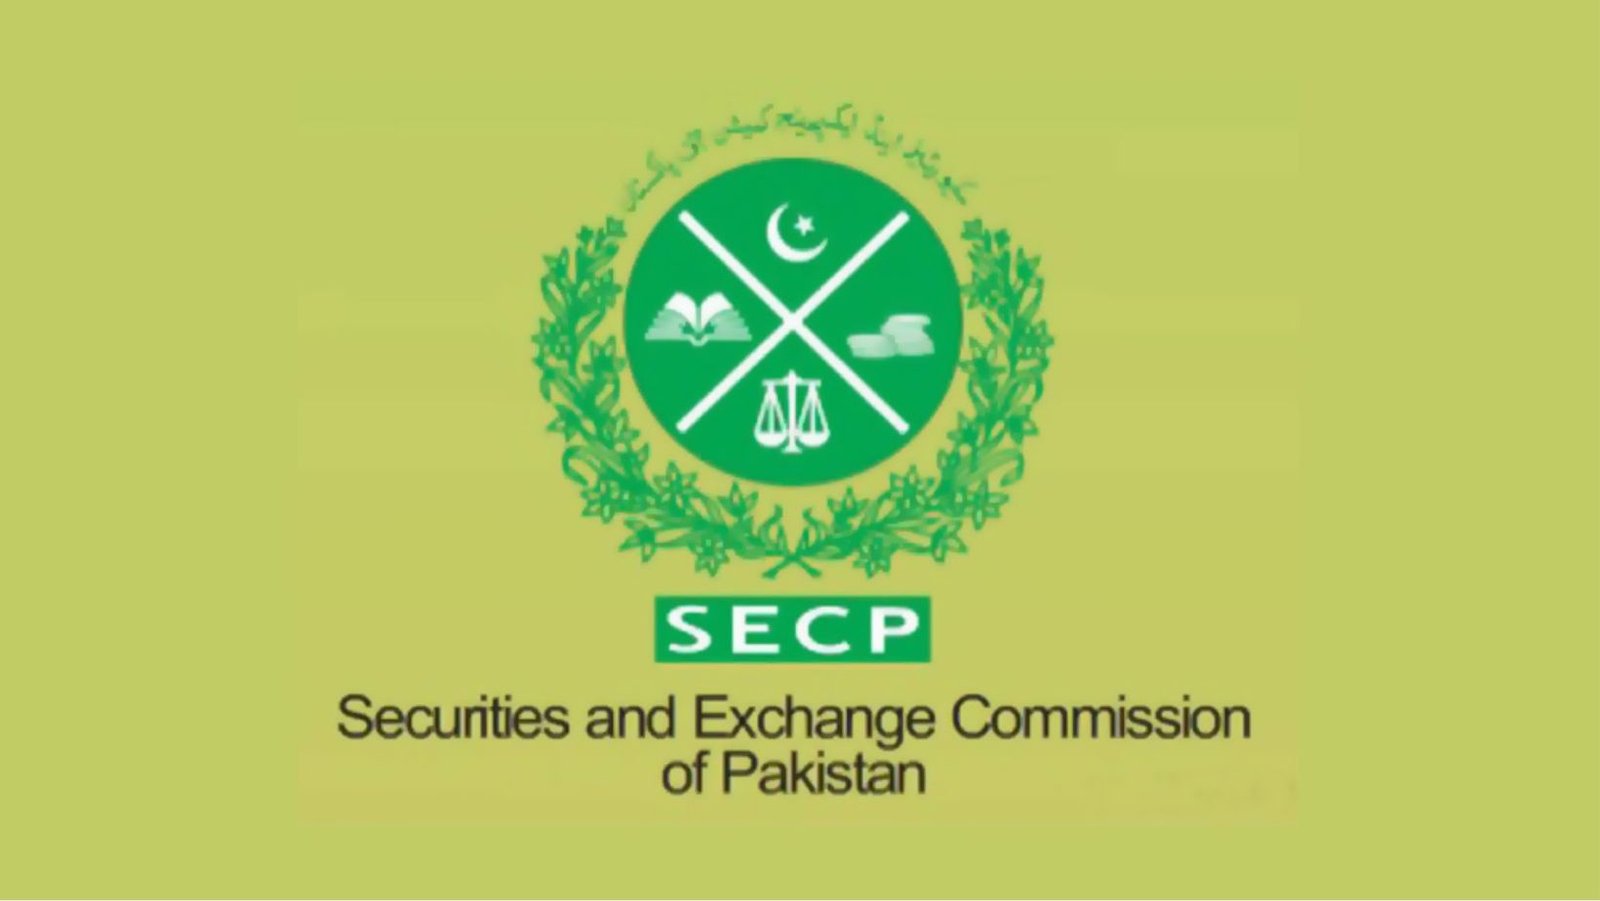 The SECP has published a diagnostic review report on Pakistan's private funds sector